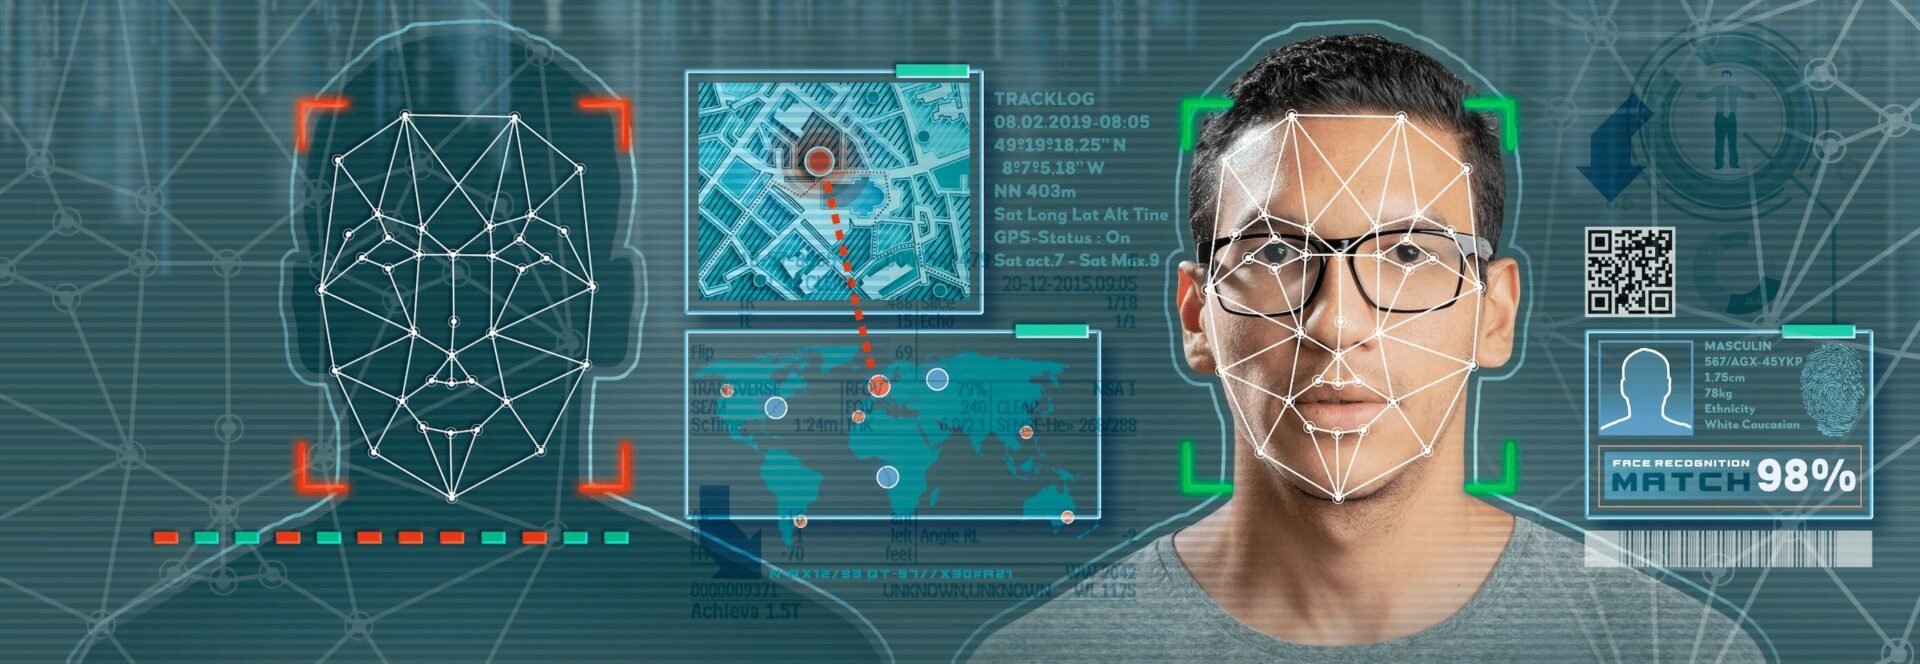 Brand intelligence: facial recognition